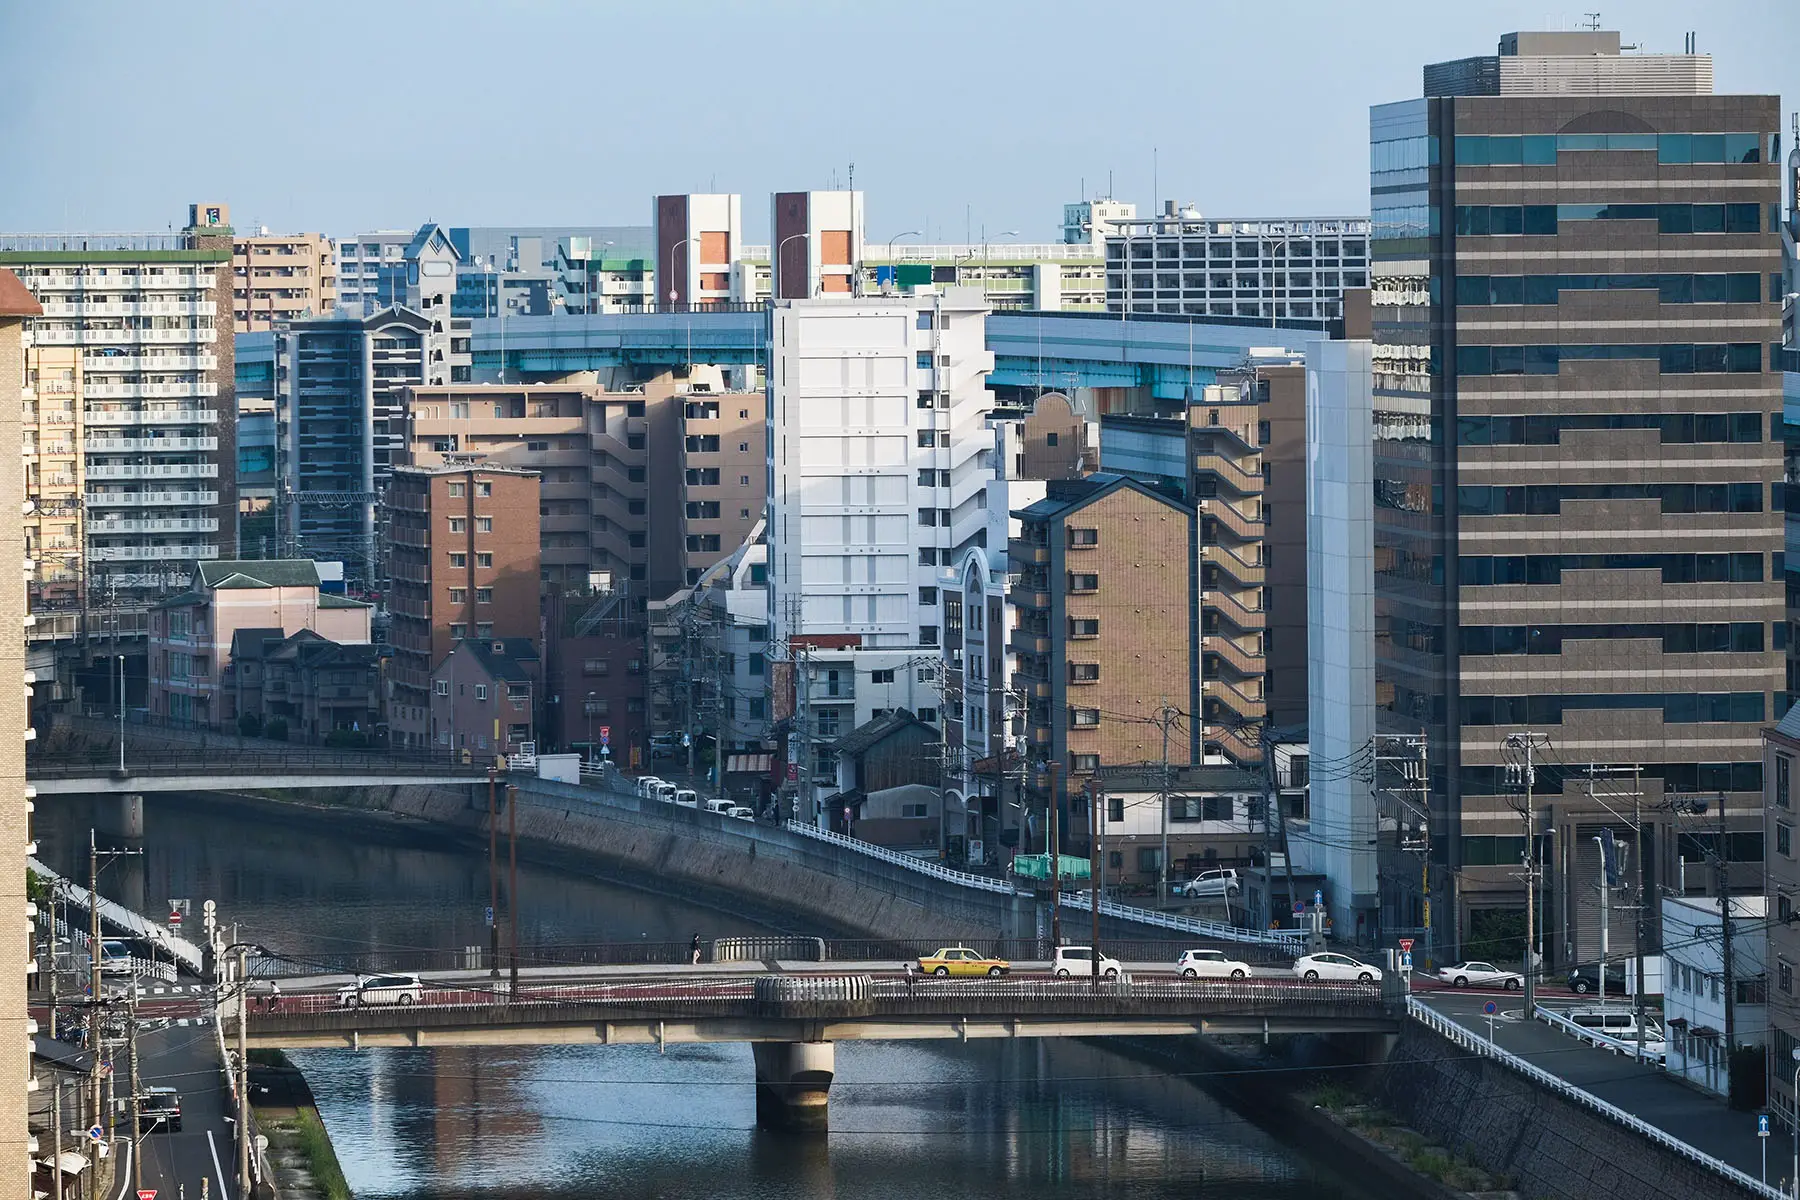 Cars driving across a bridge to the other side of a canal in Fukuoka, Japan.